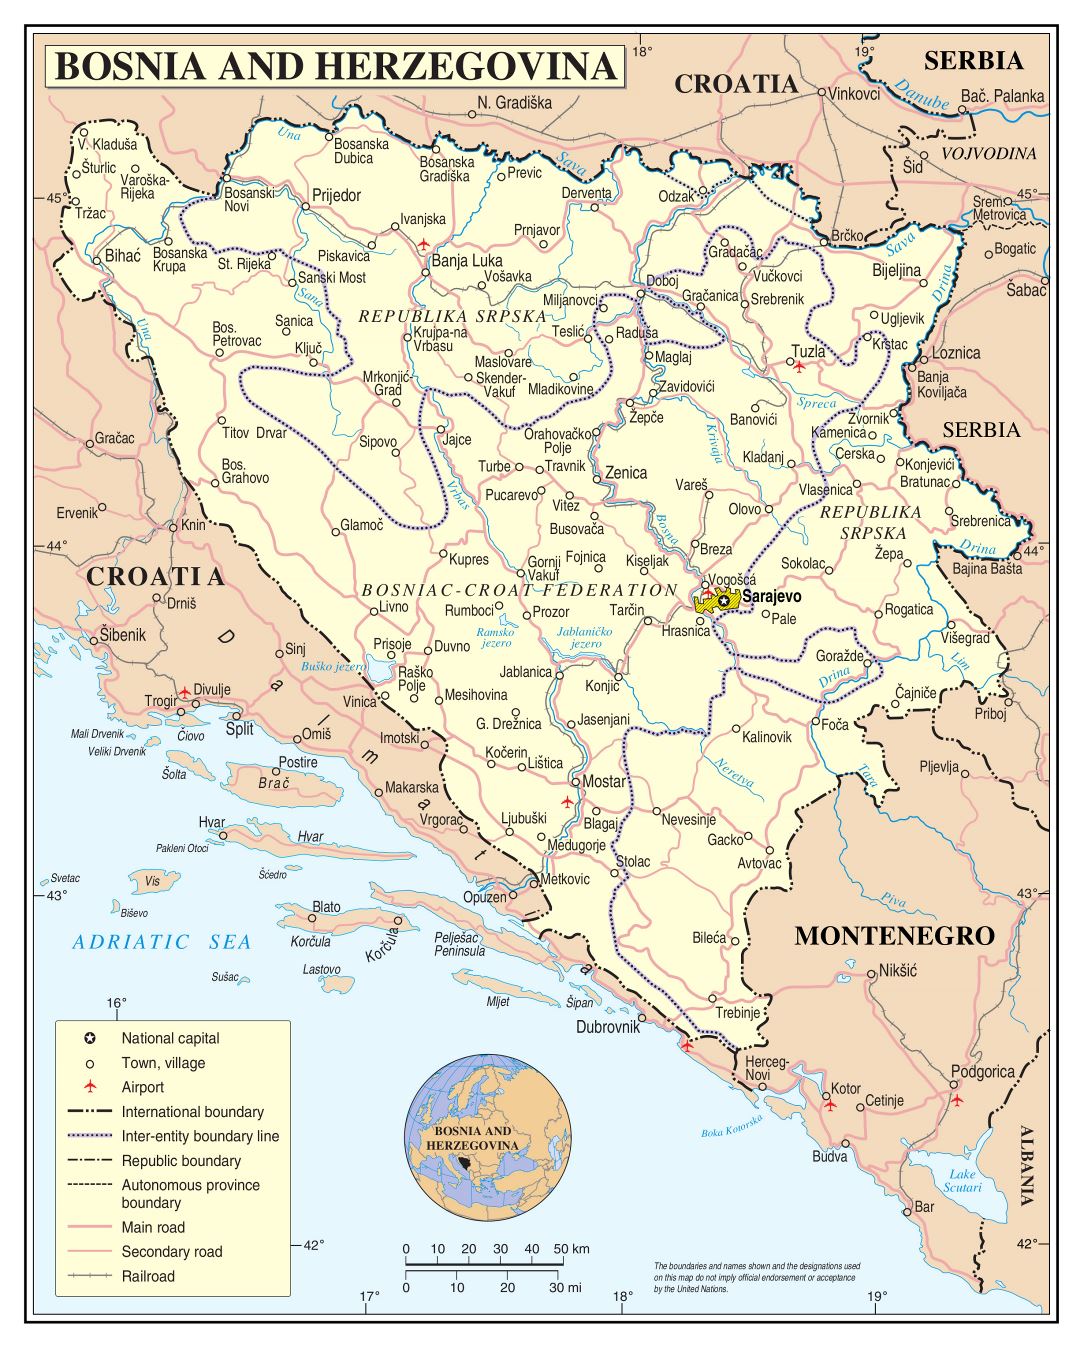 Large scale political and administrative map of Bosnia and Herzegovina with roads, cities and airports